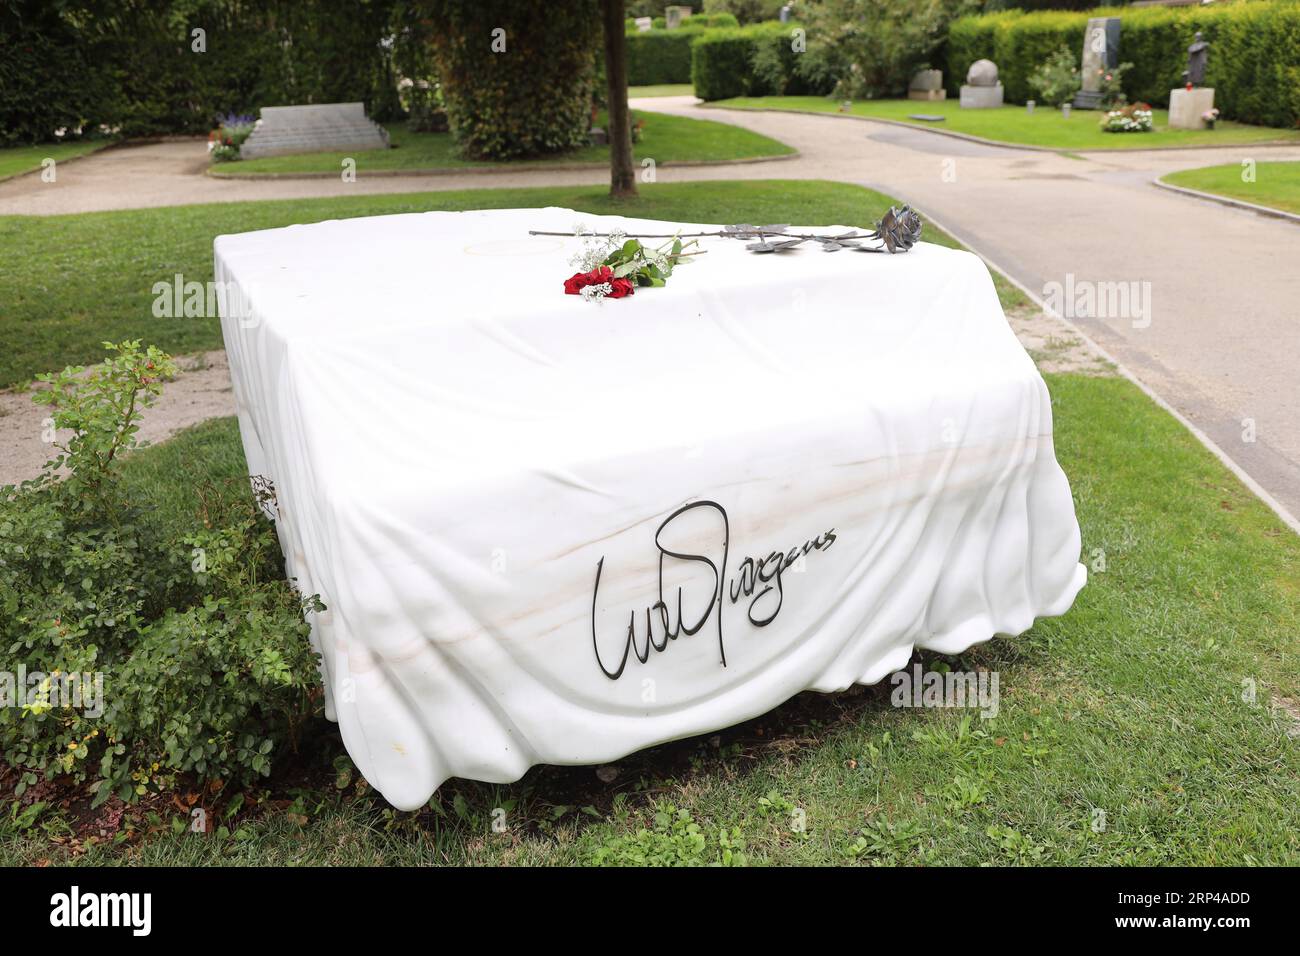 The grave of Udo Jürgens, located in Vienna's Central Cemetery, pays a unique and fitting tribute to the legendary musician and composer. The marble g Stock Photo